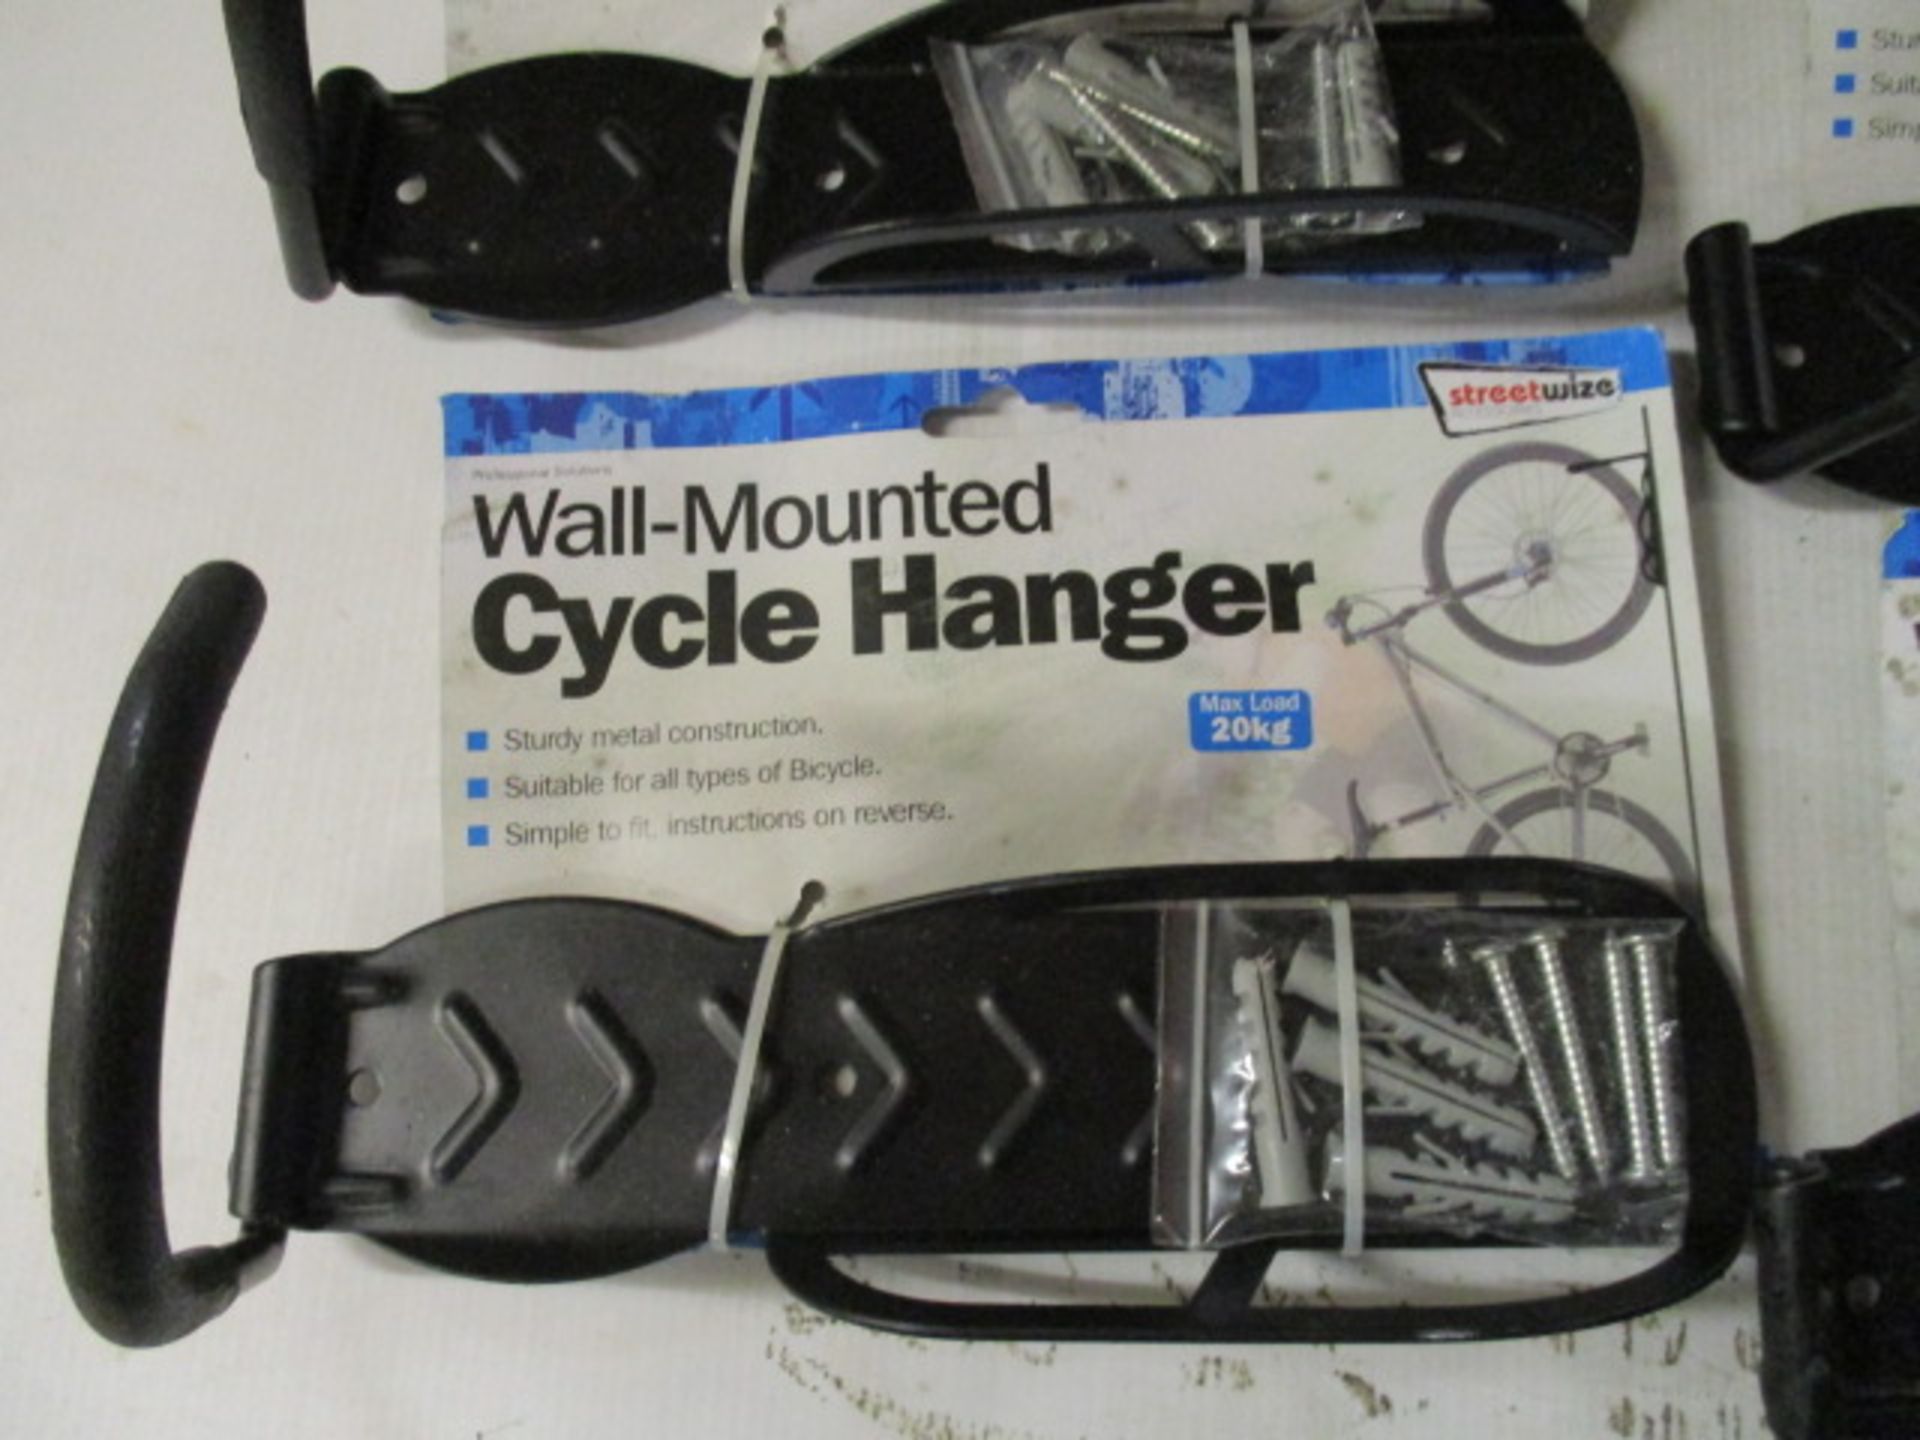 12pcs brand new wall mounted bike holders new rrp £6 - Image 2 of 2